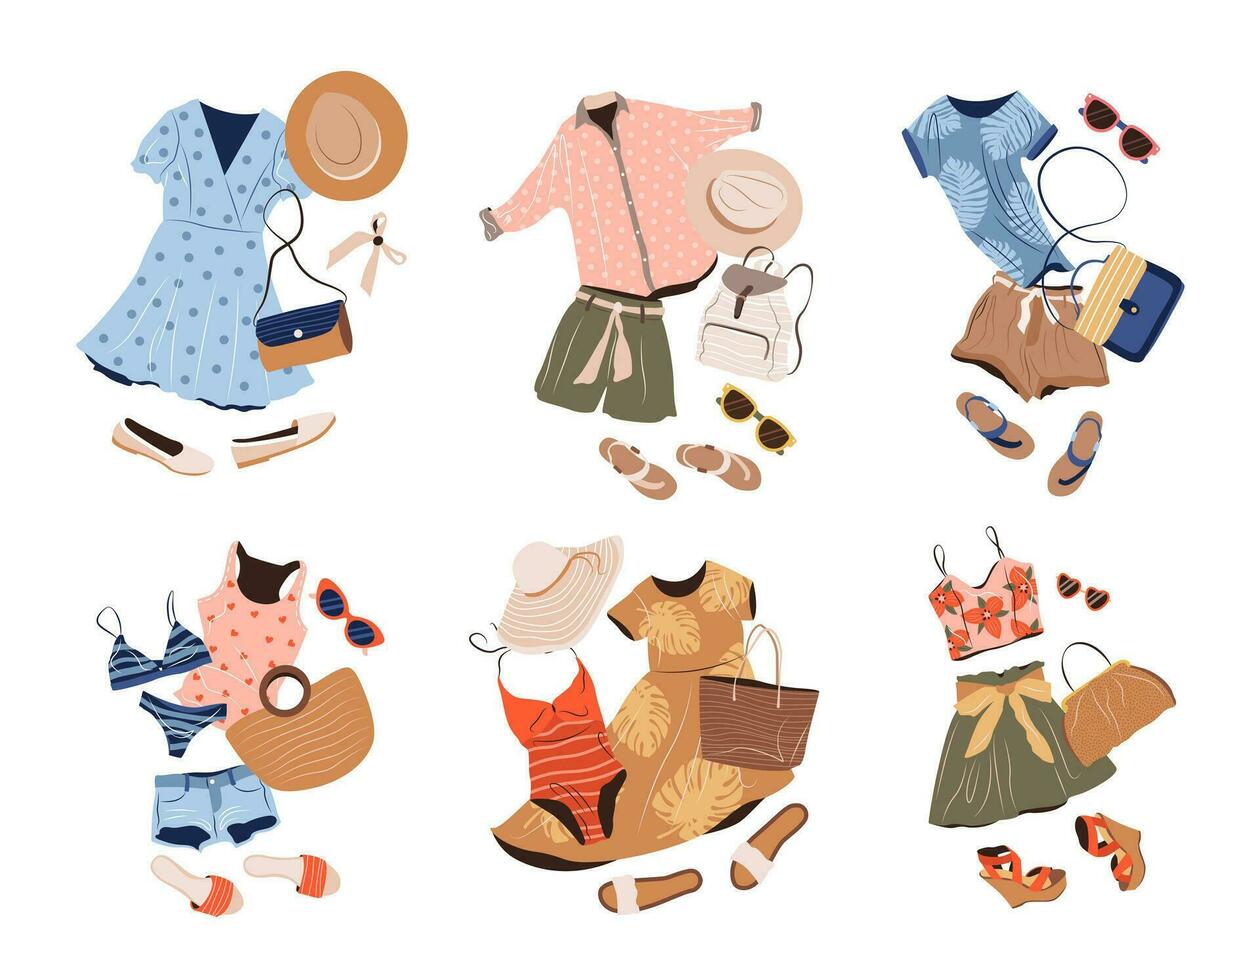 Outfits set in casual style for women. Fashion clothing, accessories, swimwear, shoes for spring, summer and vacation. isolated flat vector illustrations on background